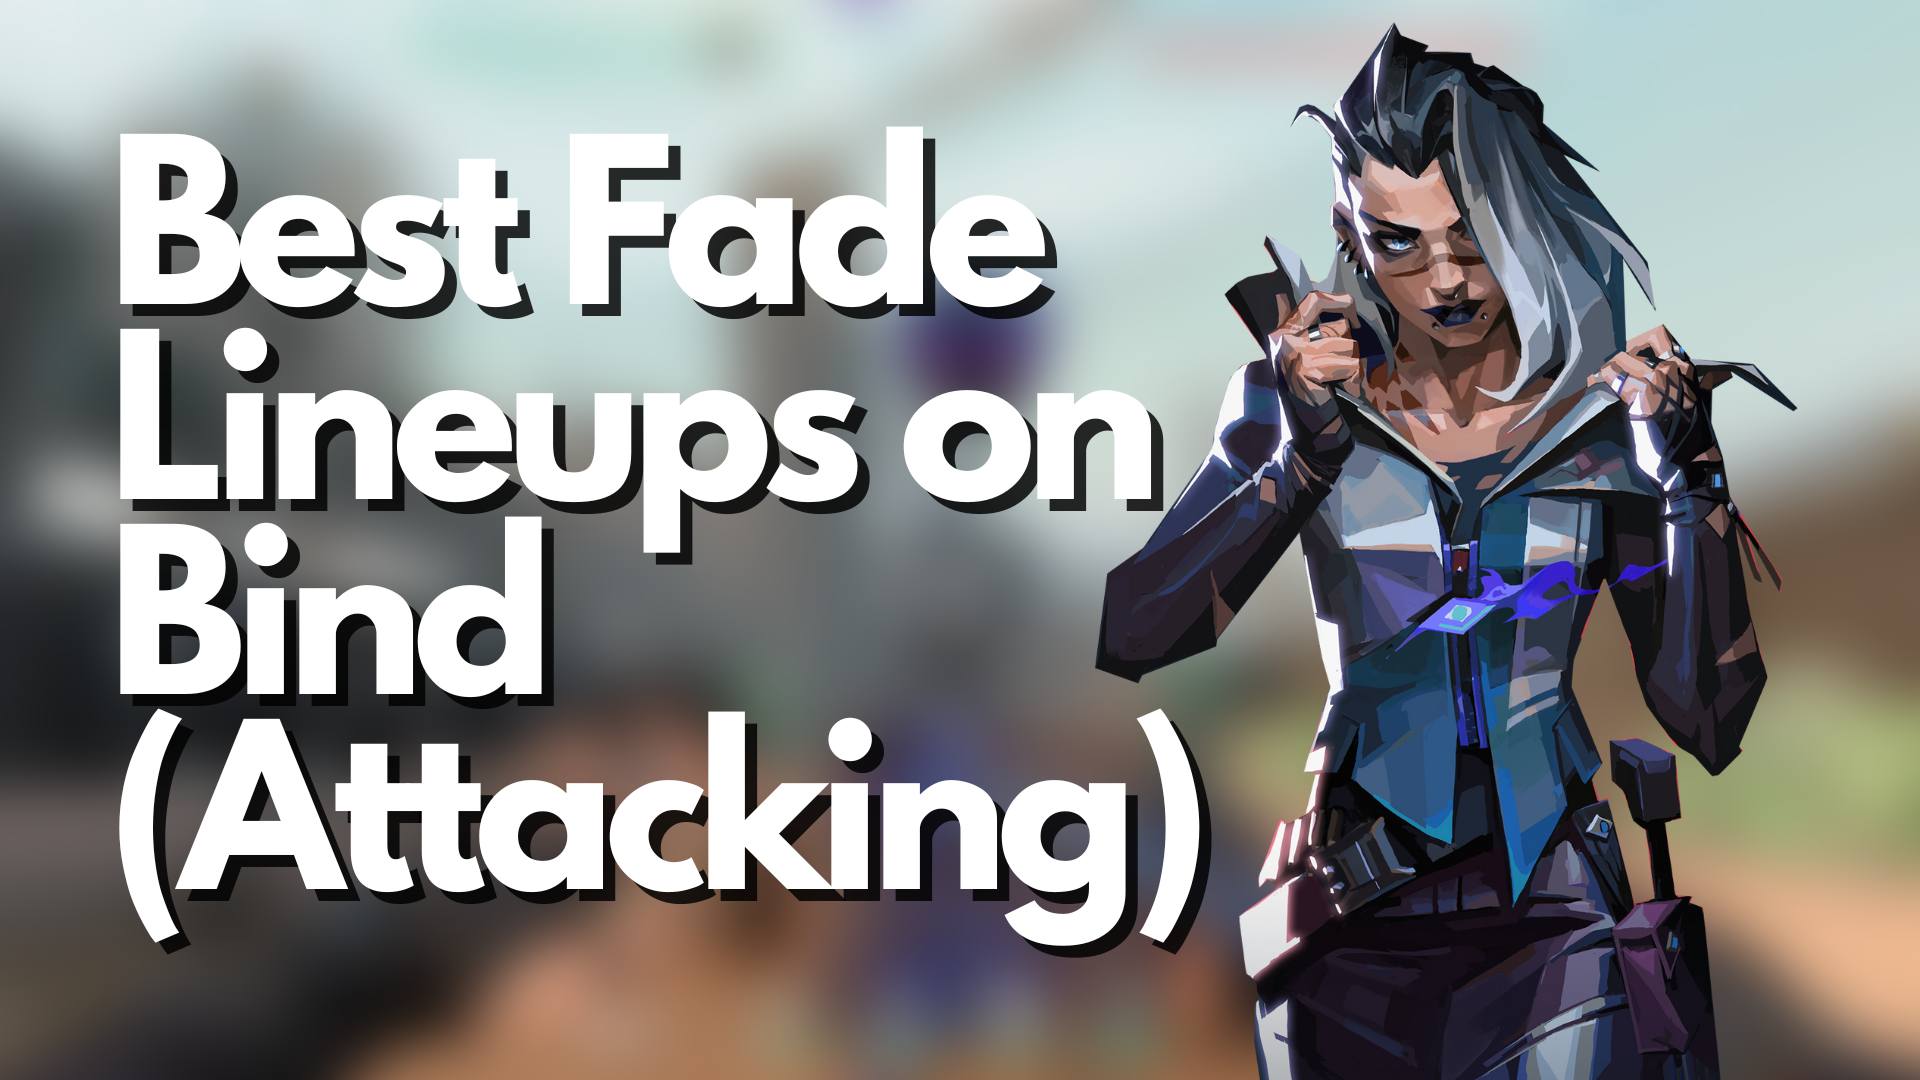 VALORANT: Best Fade Lineups on Bind (Attacking)